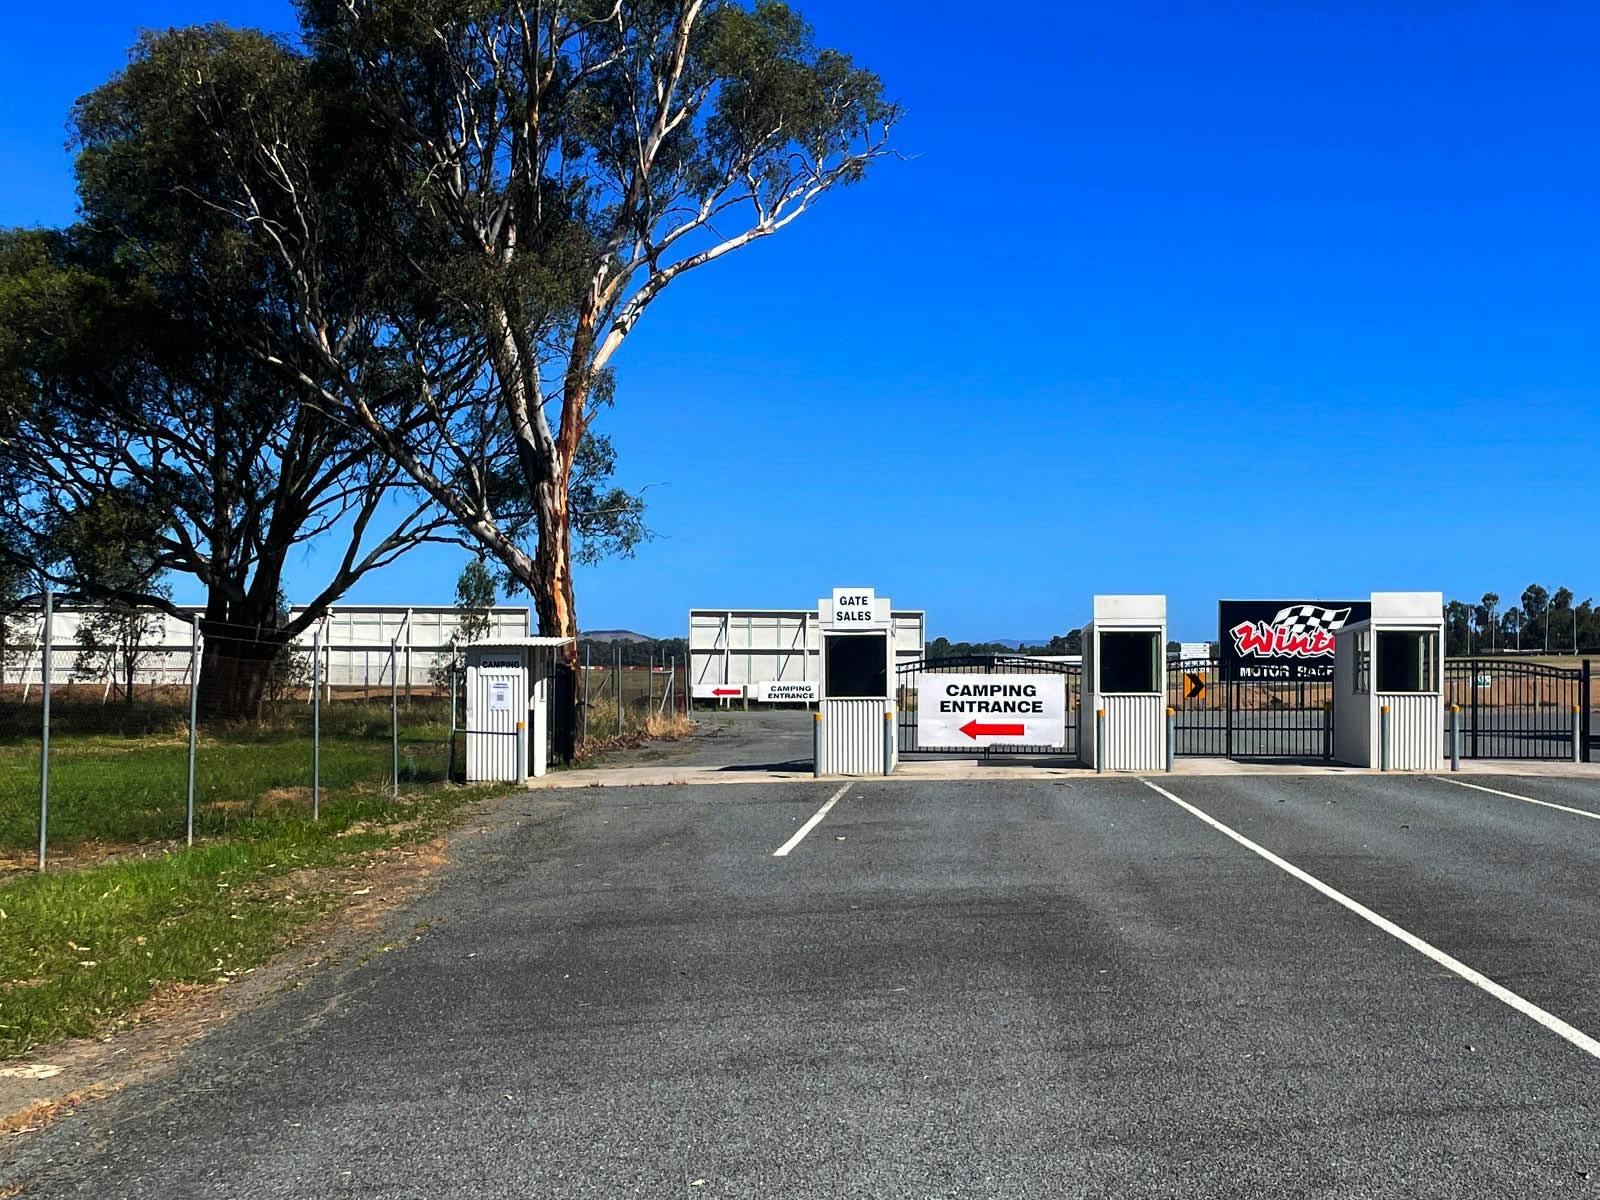 Photo of campground entrance on Huntley Street, Winton